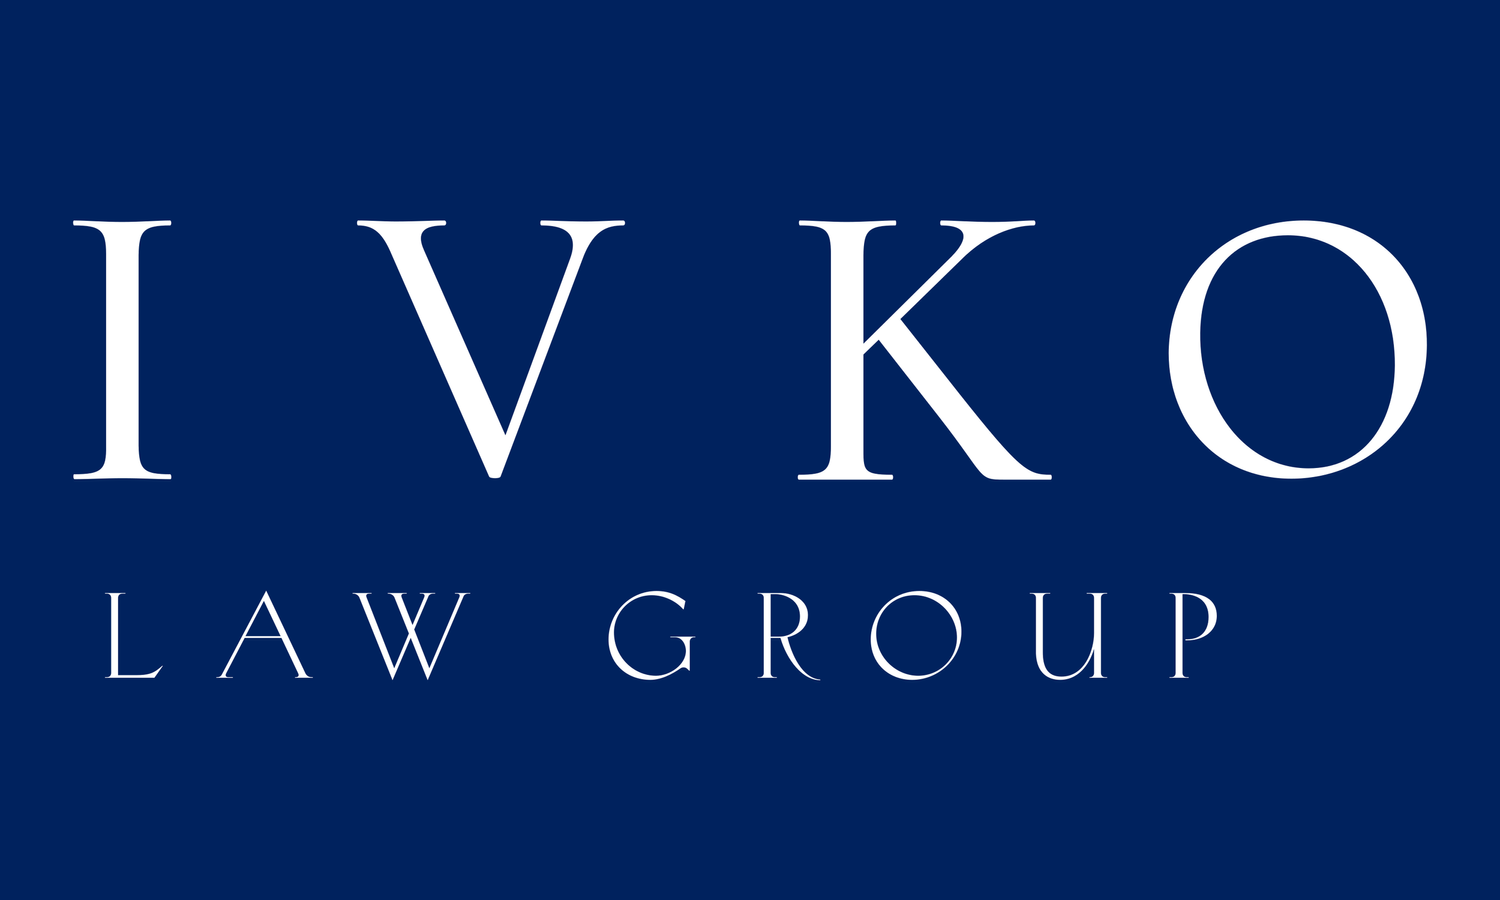 Ivko Law Group | LAWFIRM FOR VISIONARIES™ 